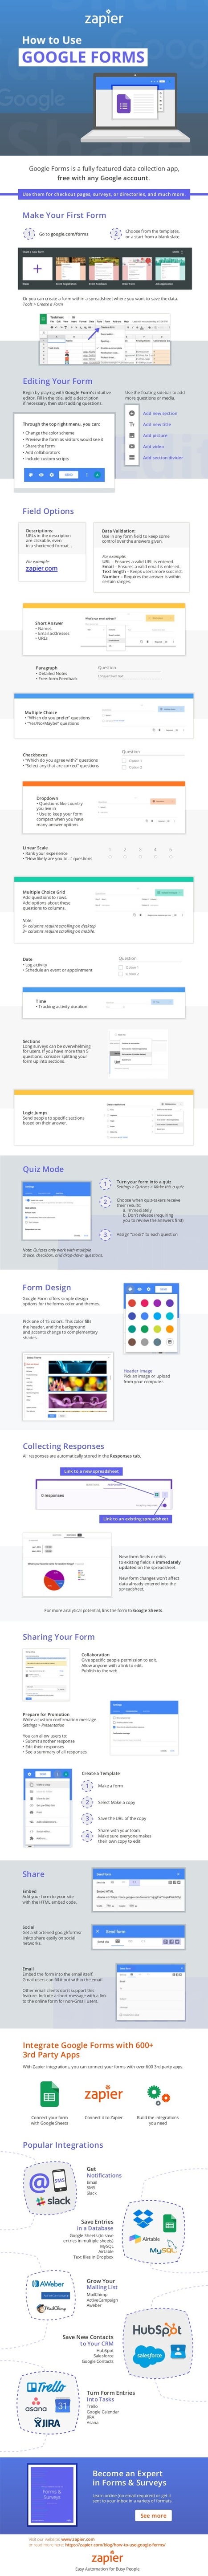 How to Use Google Forms #infographic | Time to Learn | Scoop.it